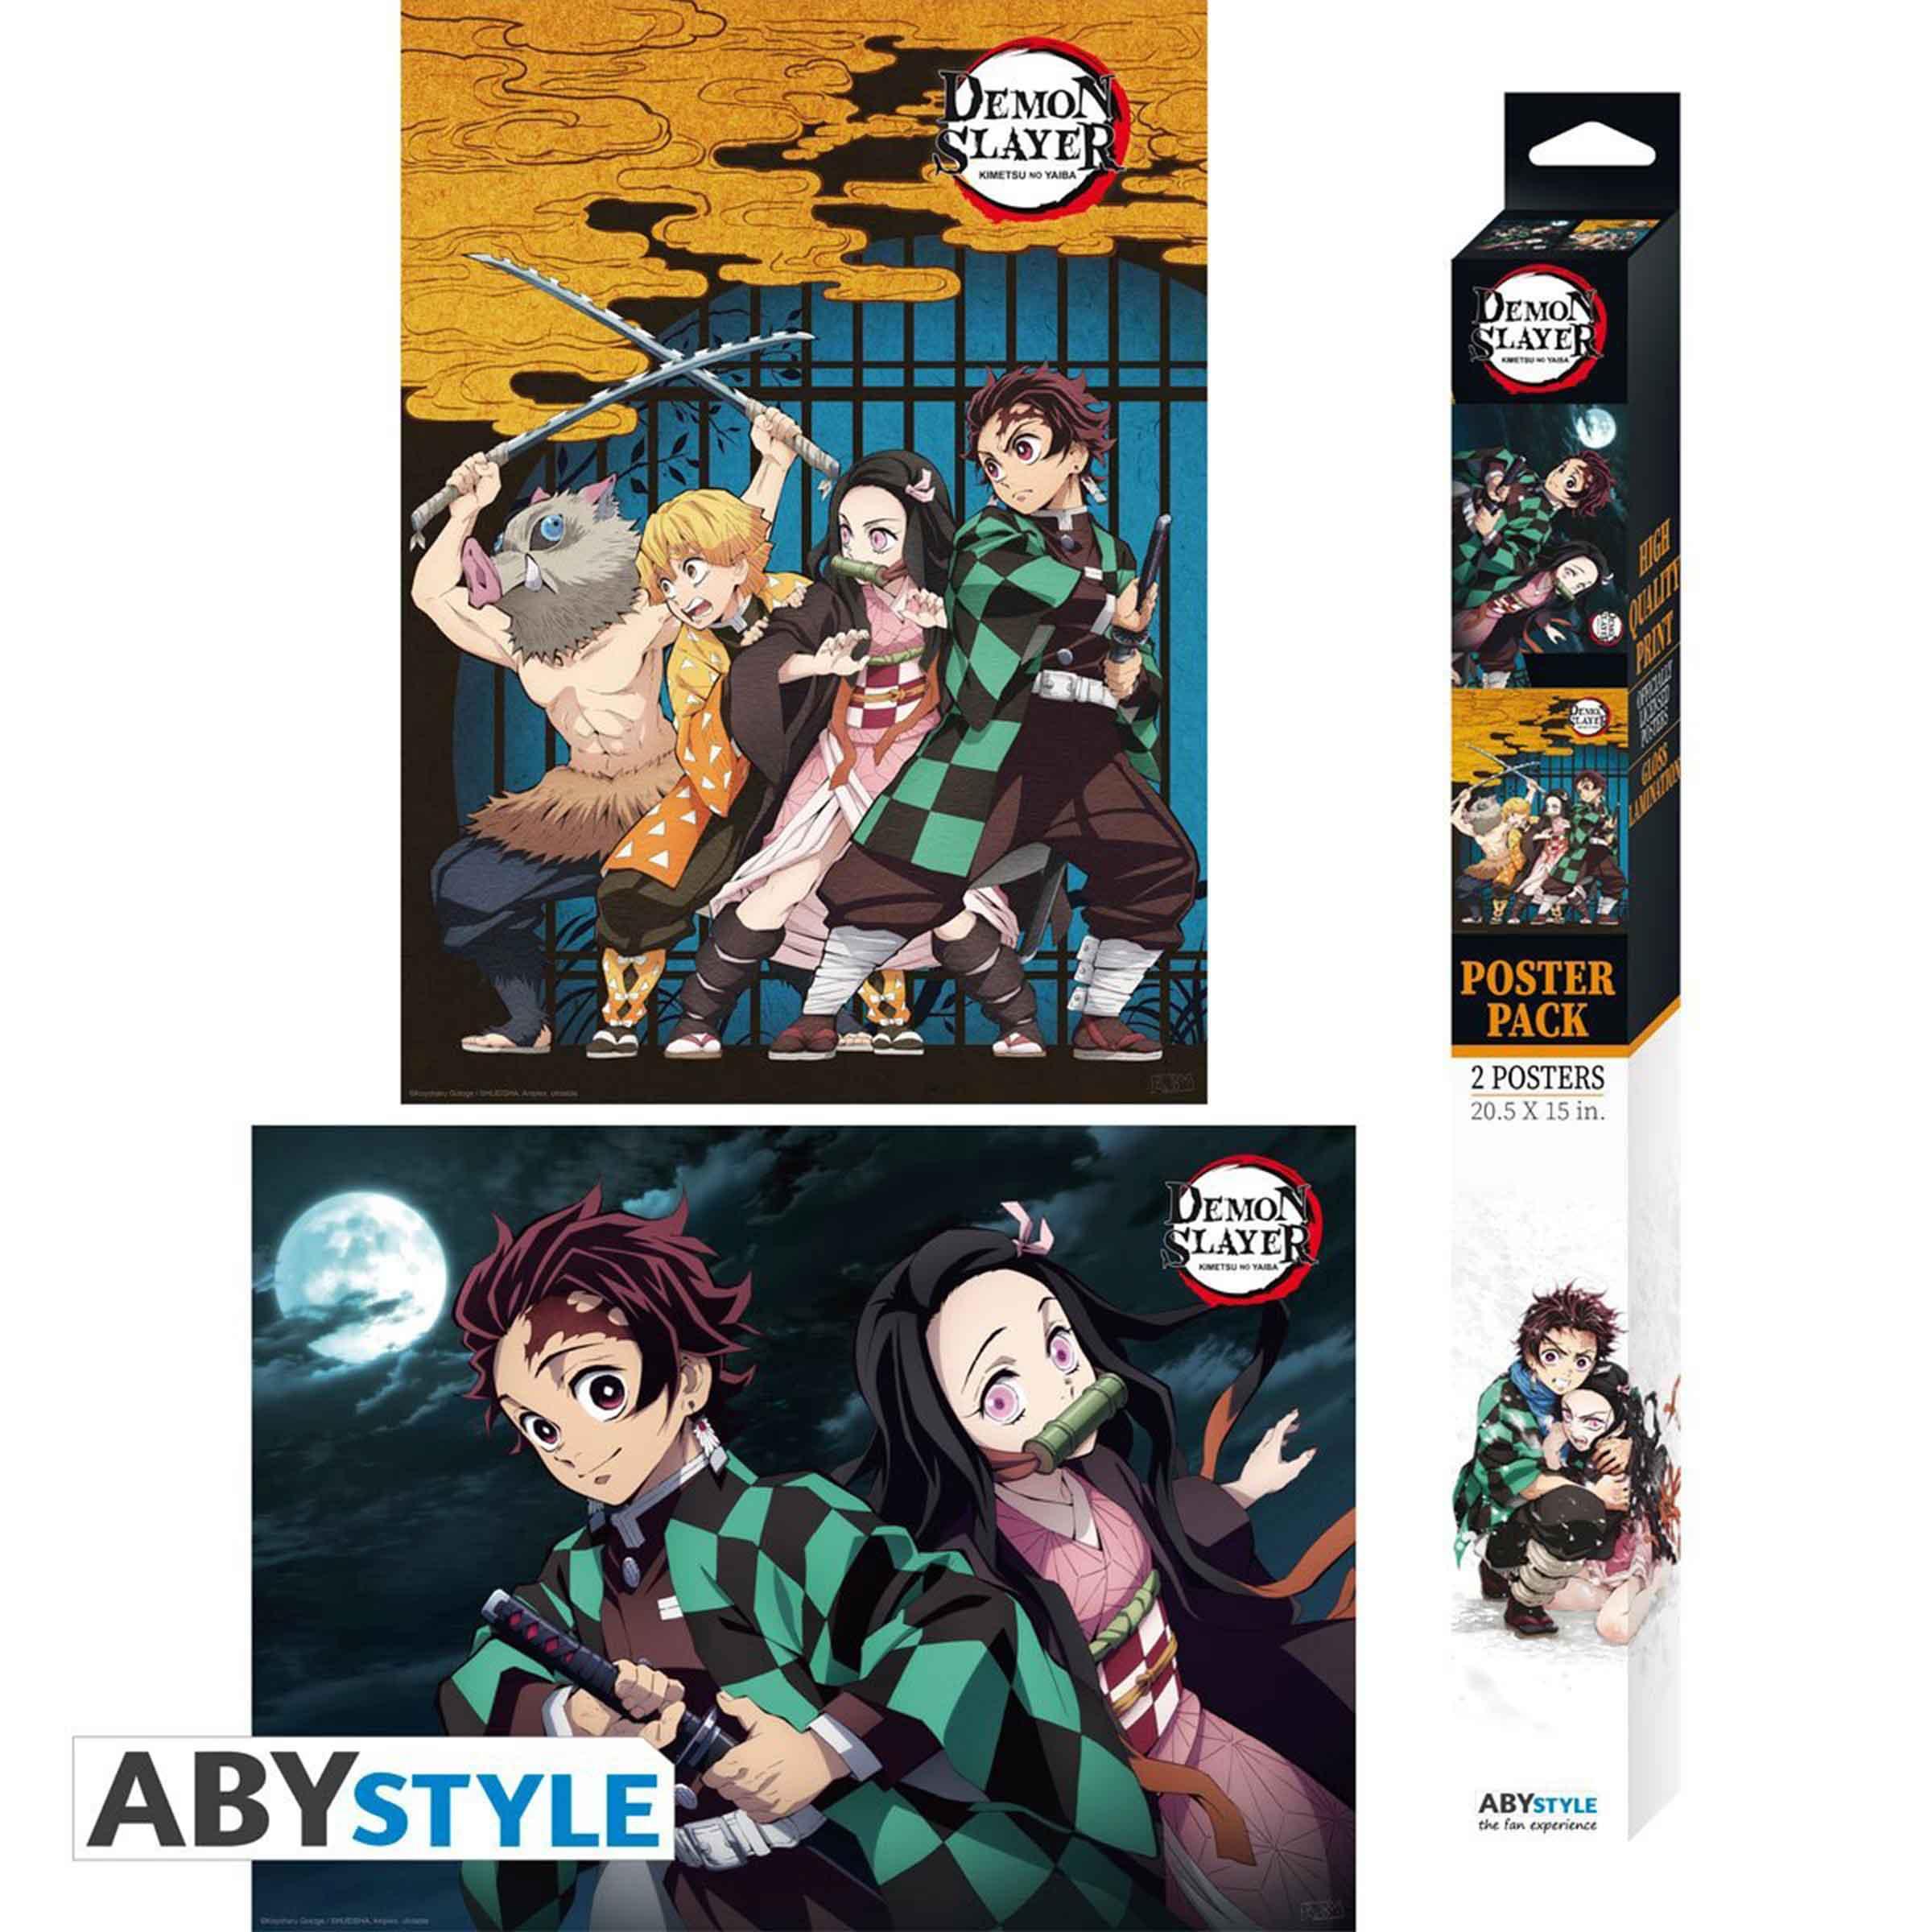 ABYstyle - Demon Slayer - Group Mini Poster (15 x 20.5)